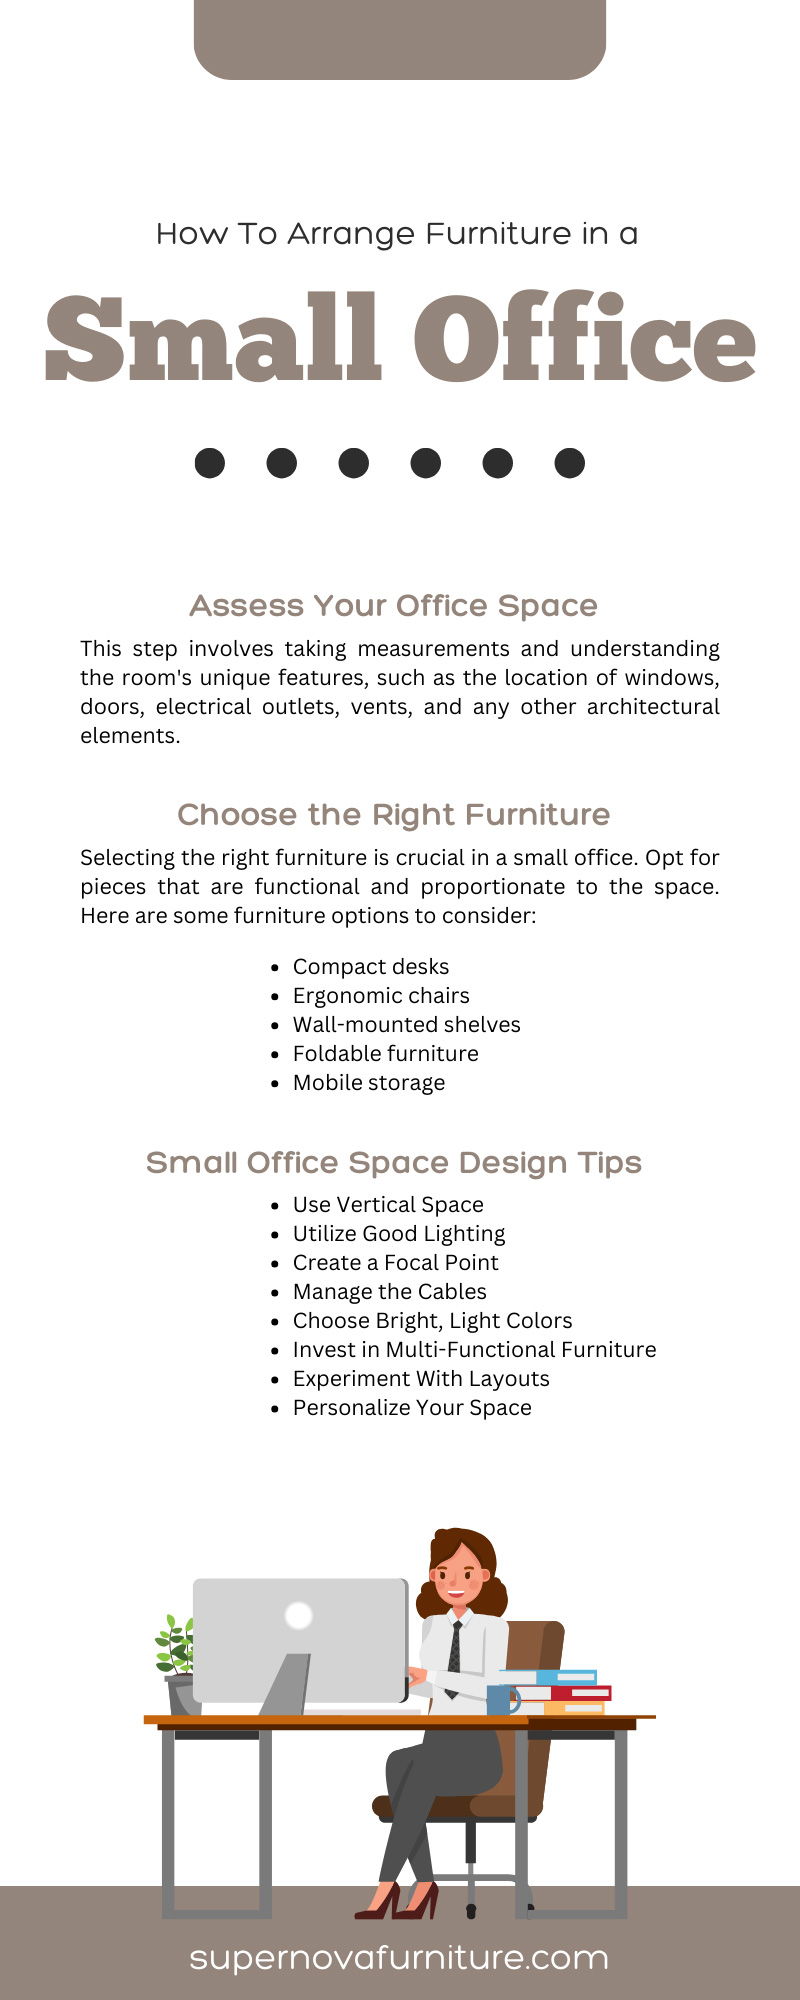 How To Arrange Furniture in a Small Office